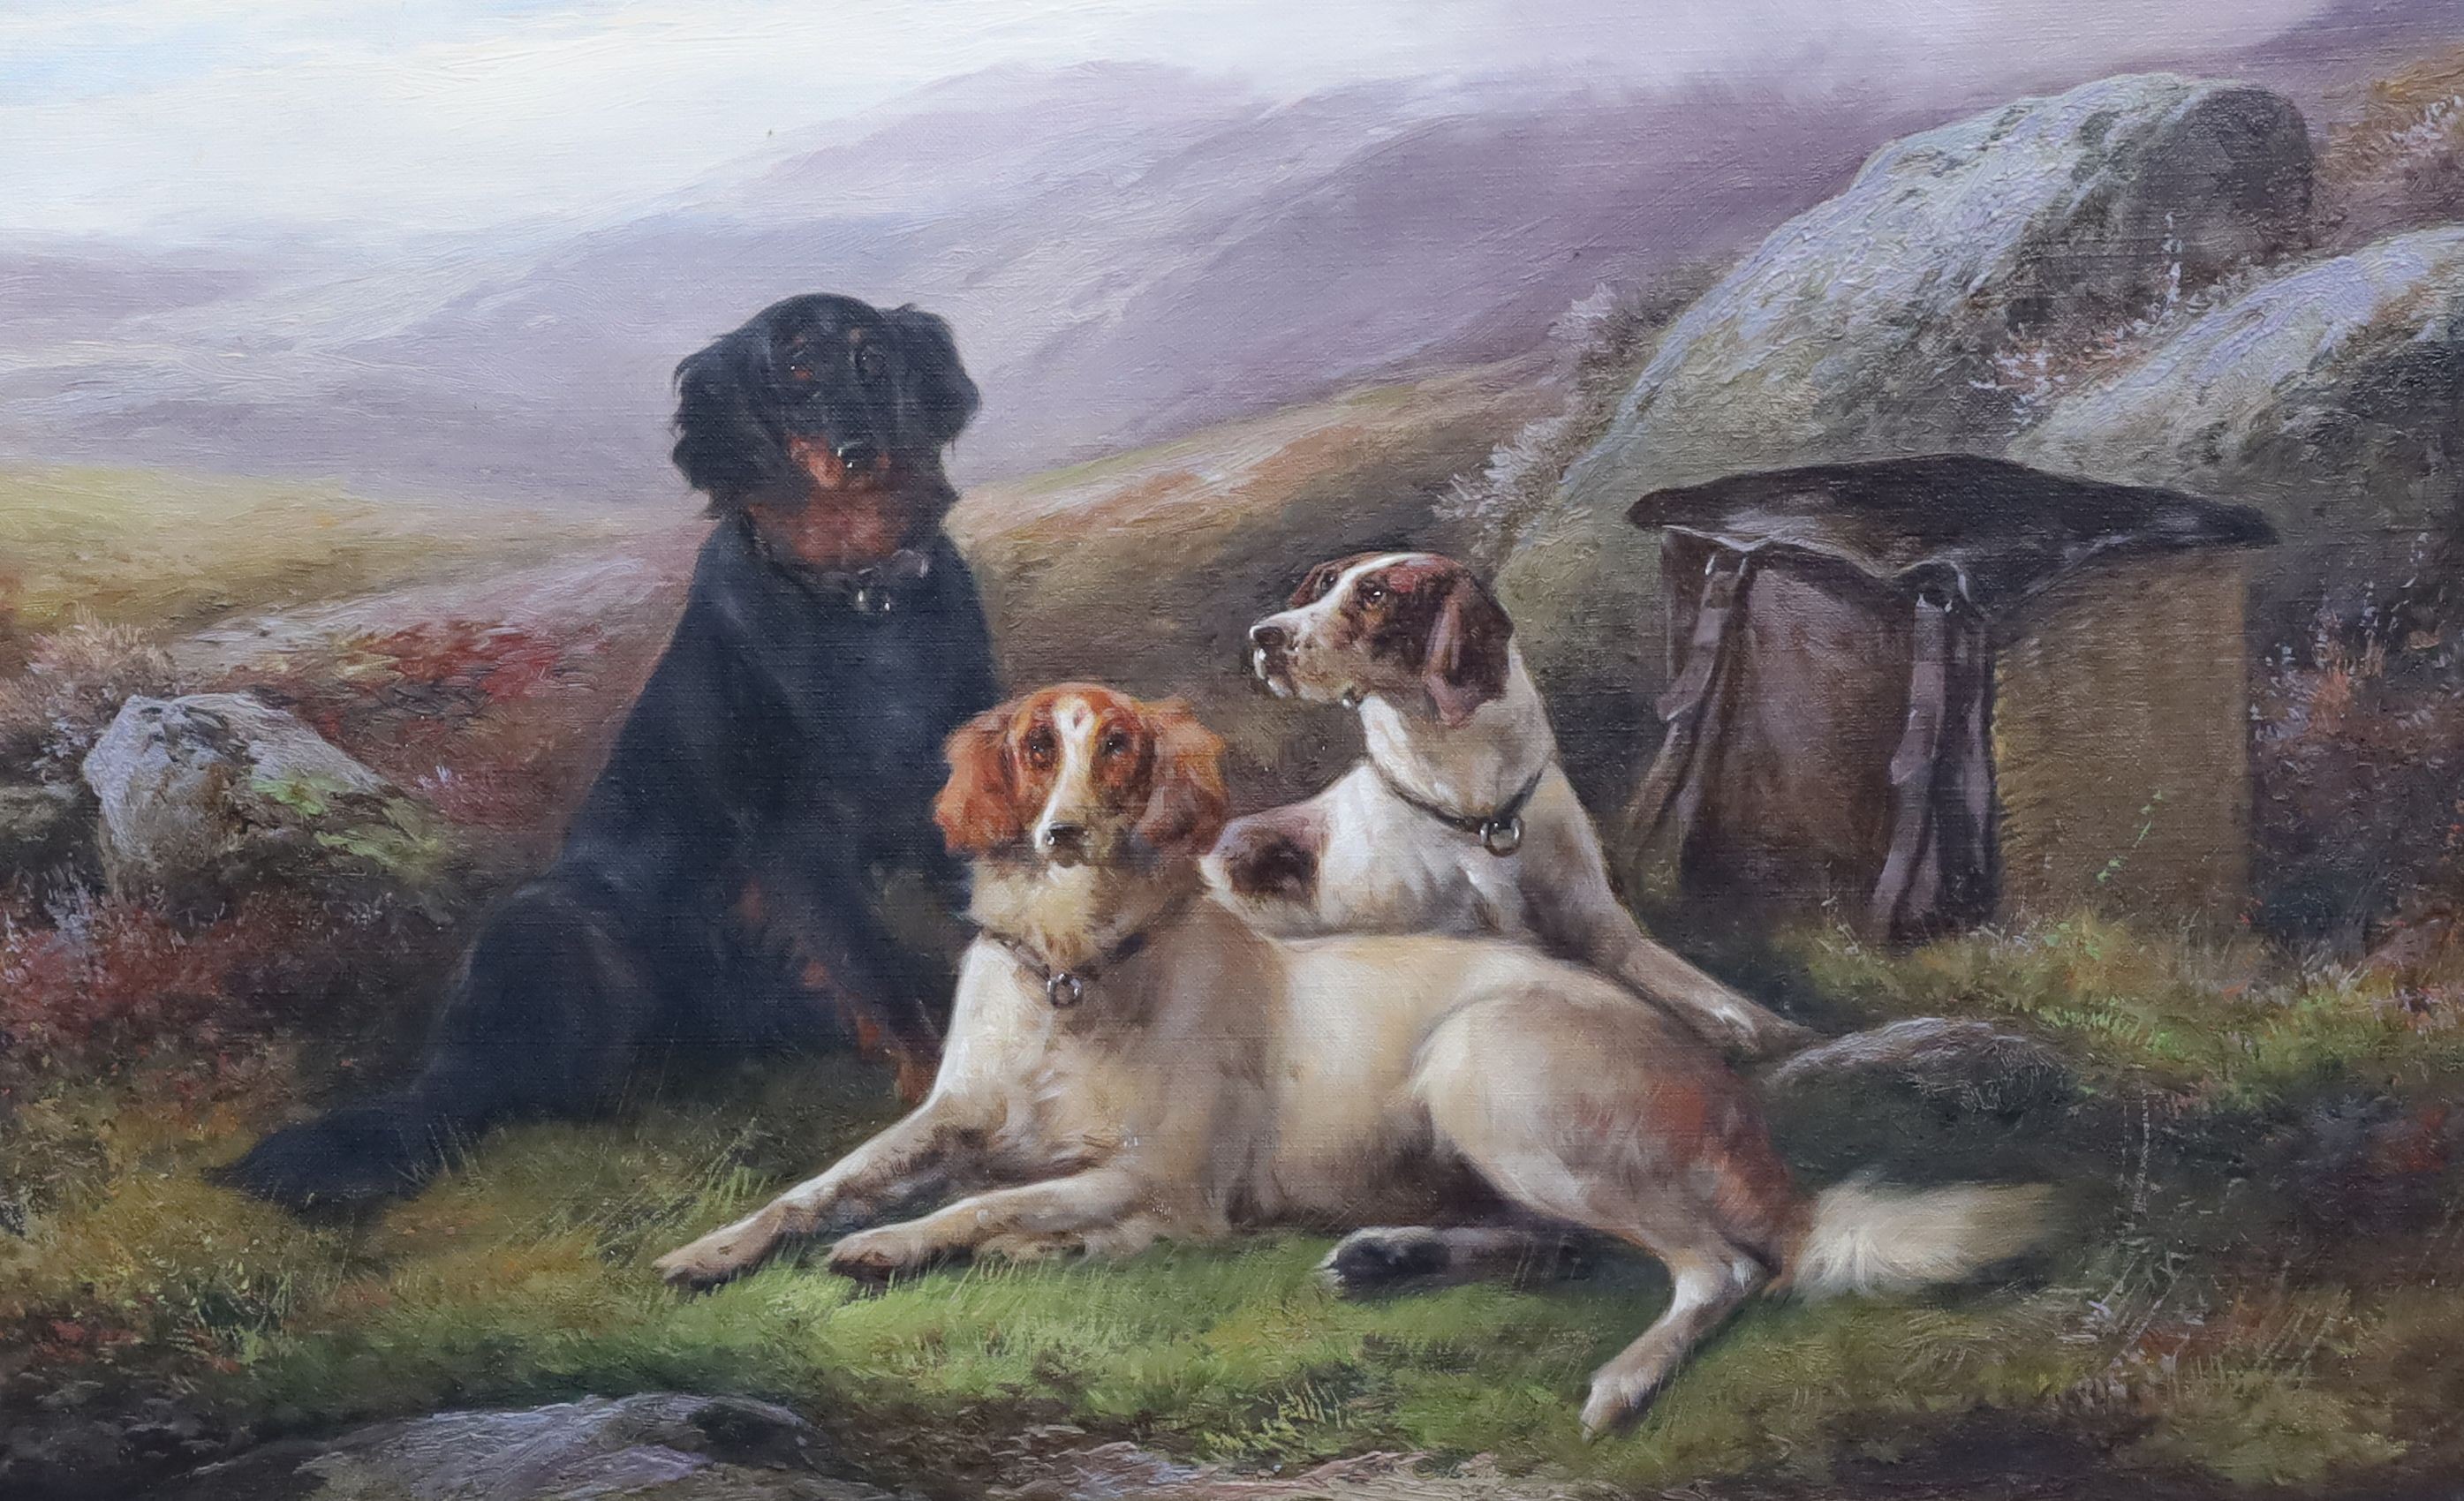 John Morris (19th C.), After the Hunt; gun dogs seated in landscapes, pair of oils on canvas, 40 x 60cm